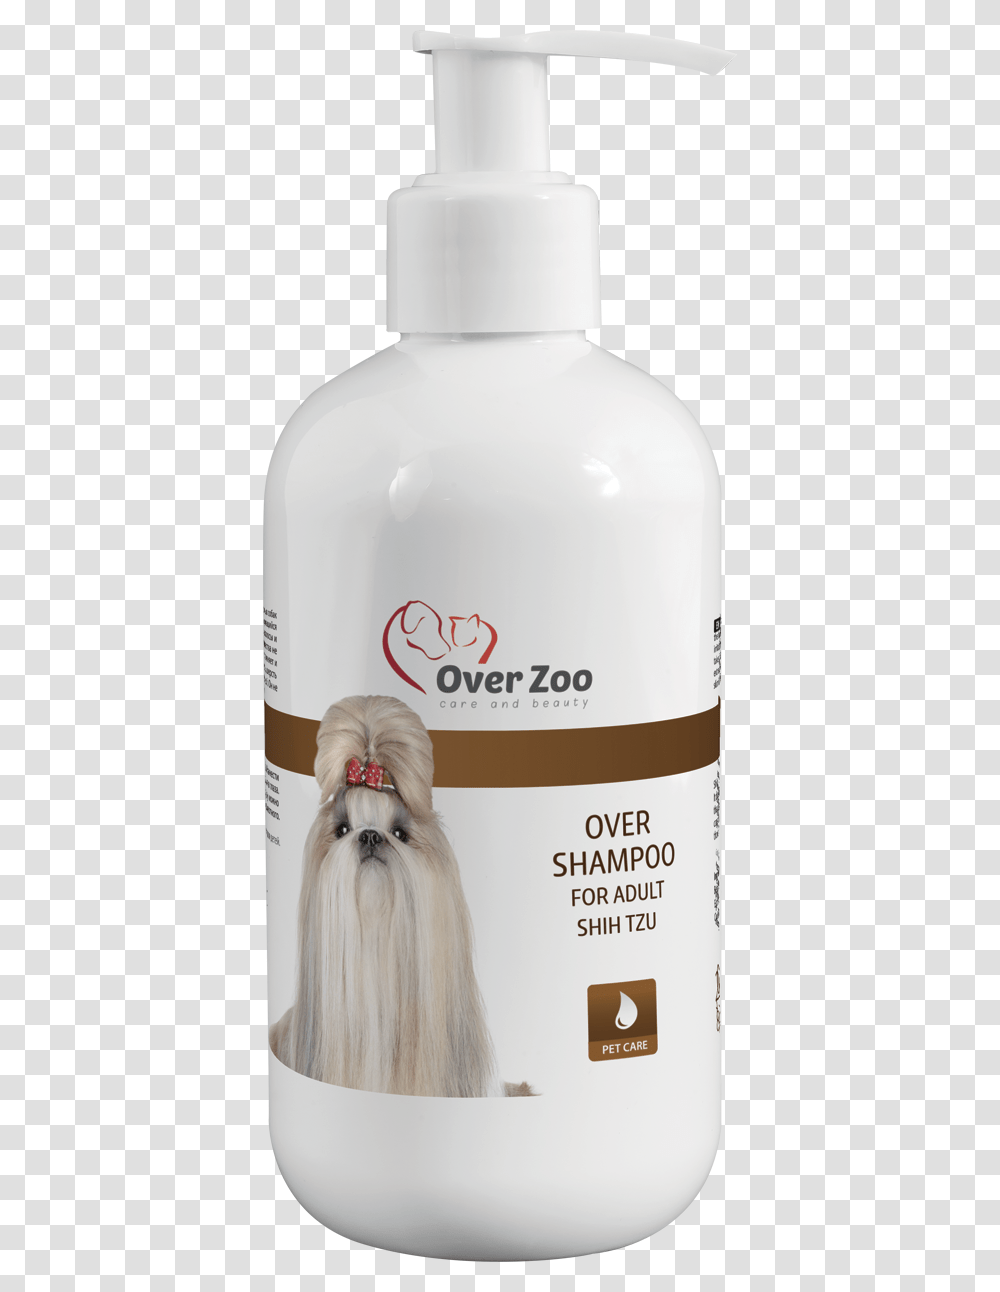 Over Shampoo For Shih Tzu Shampoo For Wirehaired Dogs, Milk, Beverage, Drink, Aluminium Transparent Png